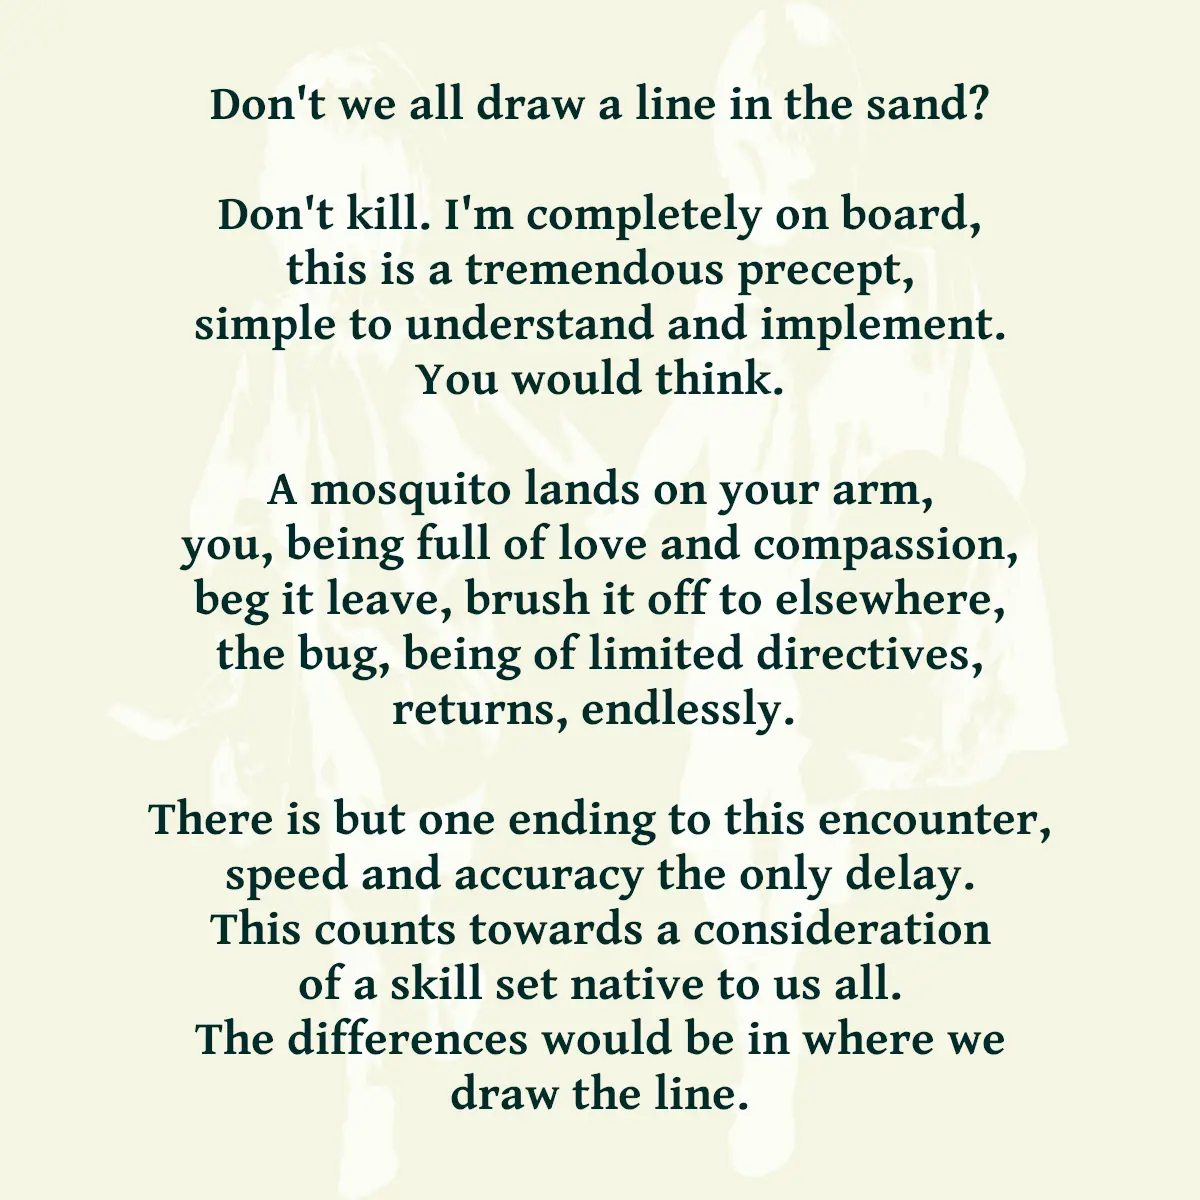 Don't we all draw a line in the sand? Don't kill. I'm completely on board, this is a tremendous precept, simple to understand and implement. You would think. A mosquito lands on your arm, you, being full of love and compassion, beg it leave, brush it off to elsewhere, the bug, being of limited directives, returns, endlessly. There is but one ending to this encounter, speed and accuracy the only delay. This counts towards a consideration of a skill set native to us all. The differences would be in where we draw the line.